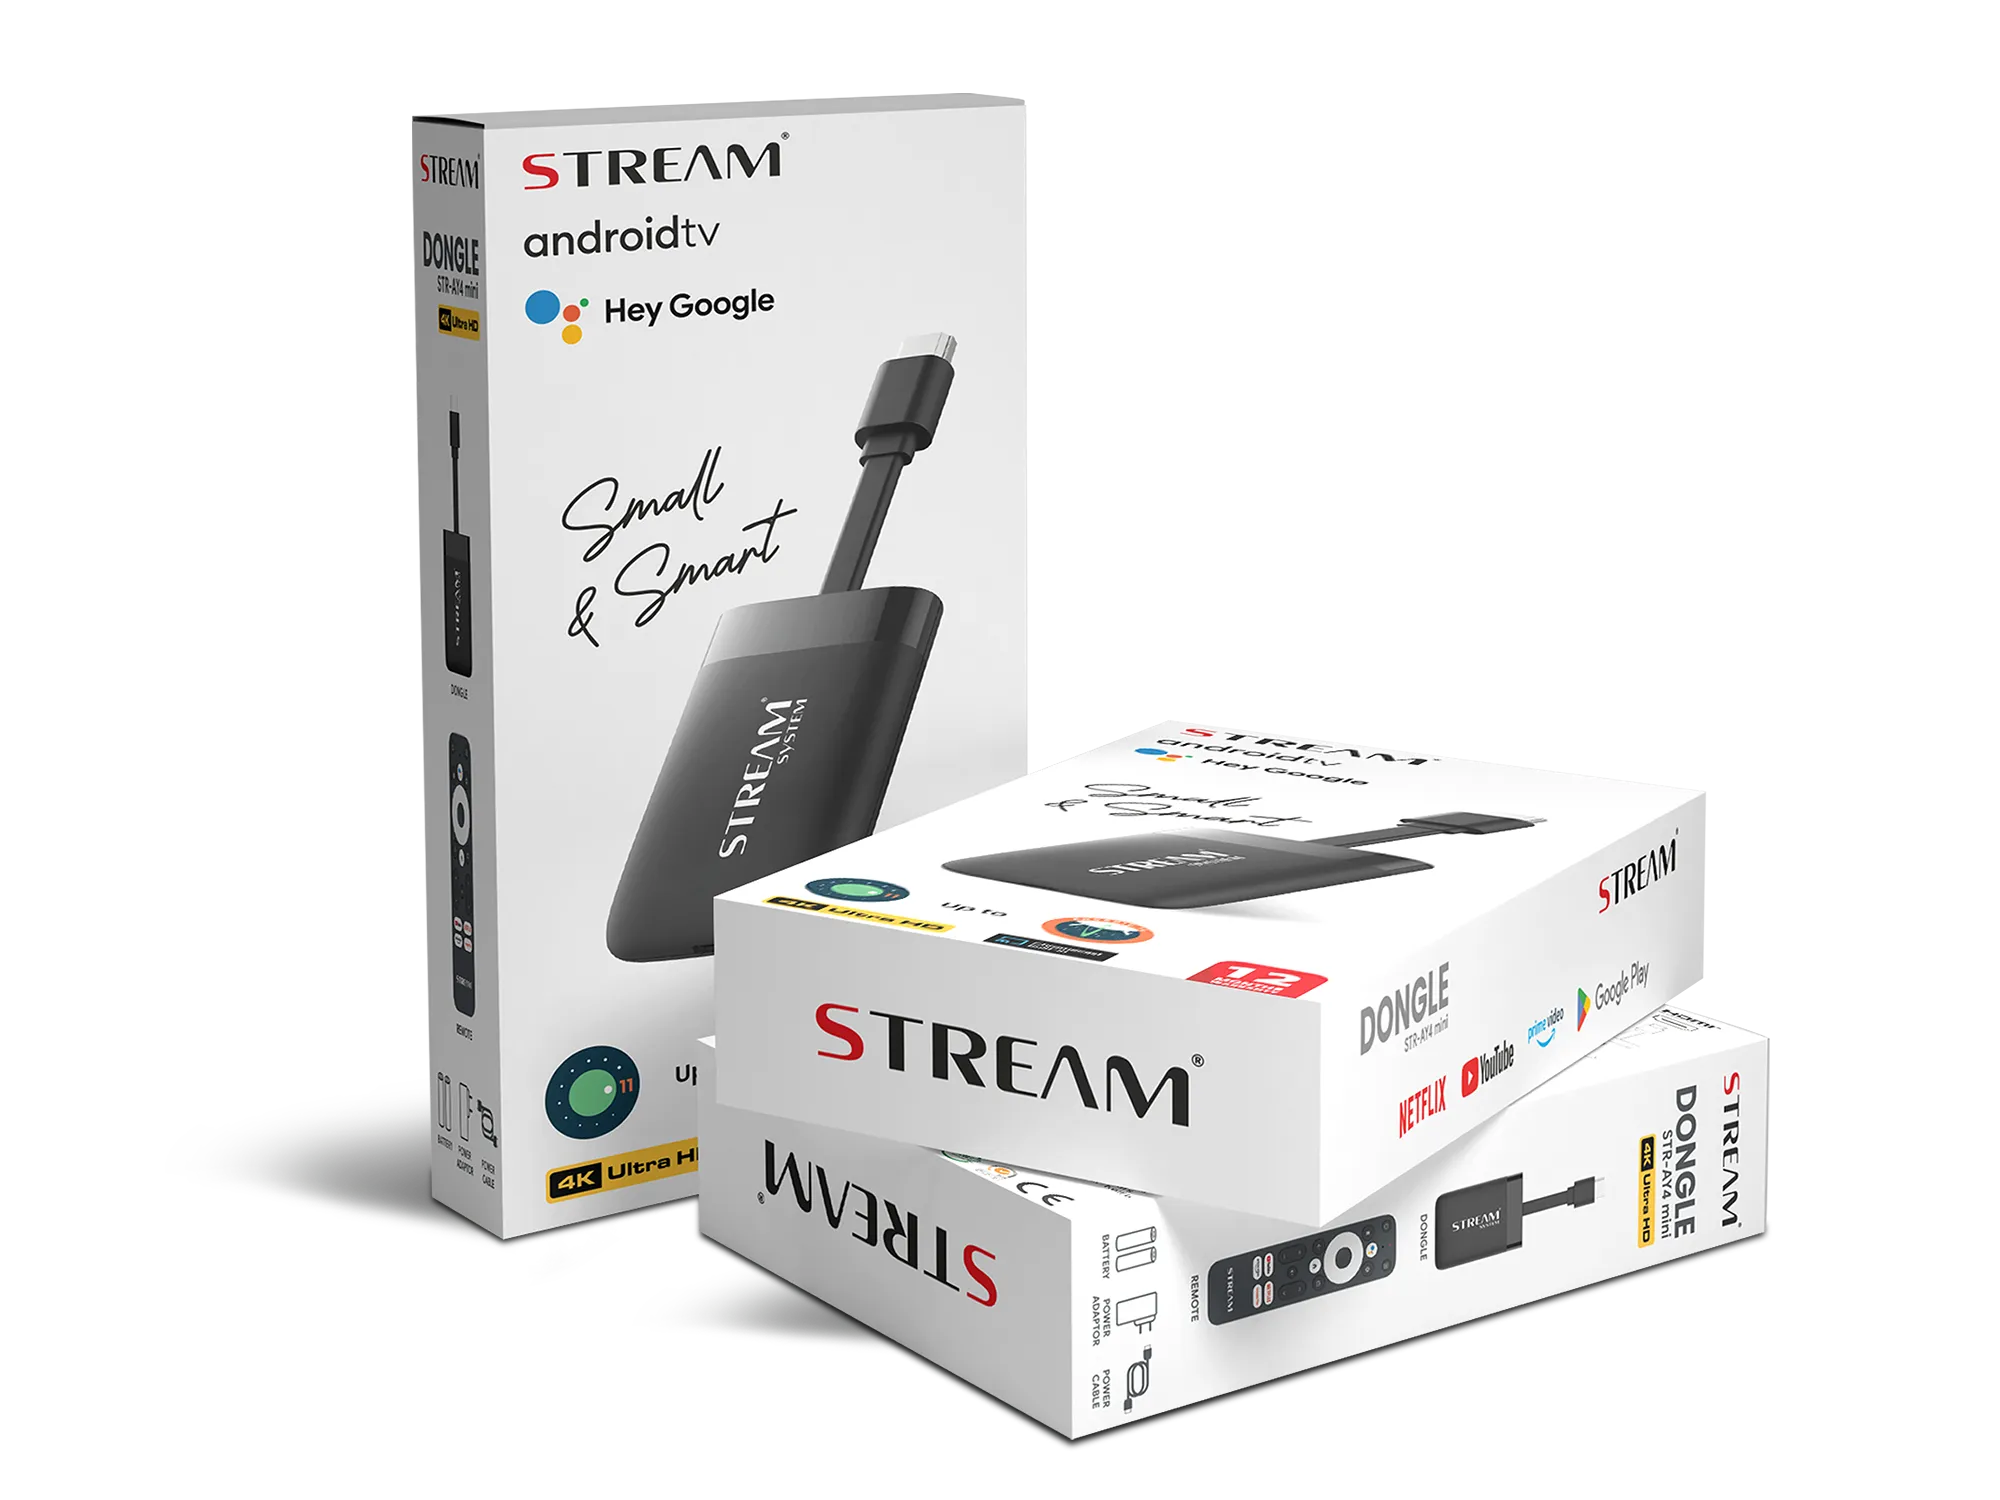 Packaging du Dongle Android TV de STREAM